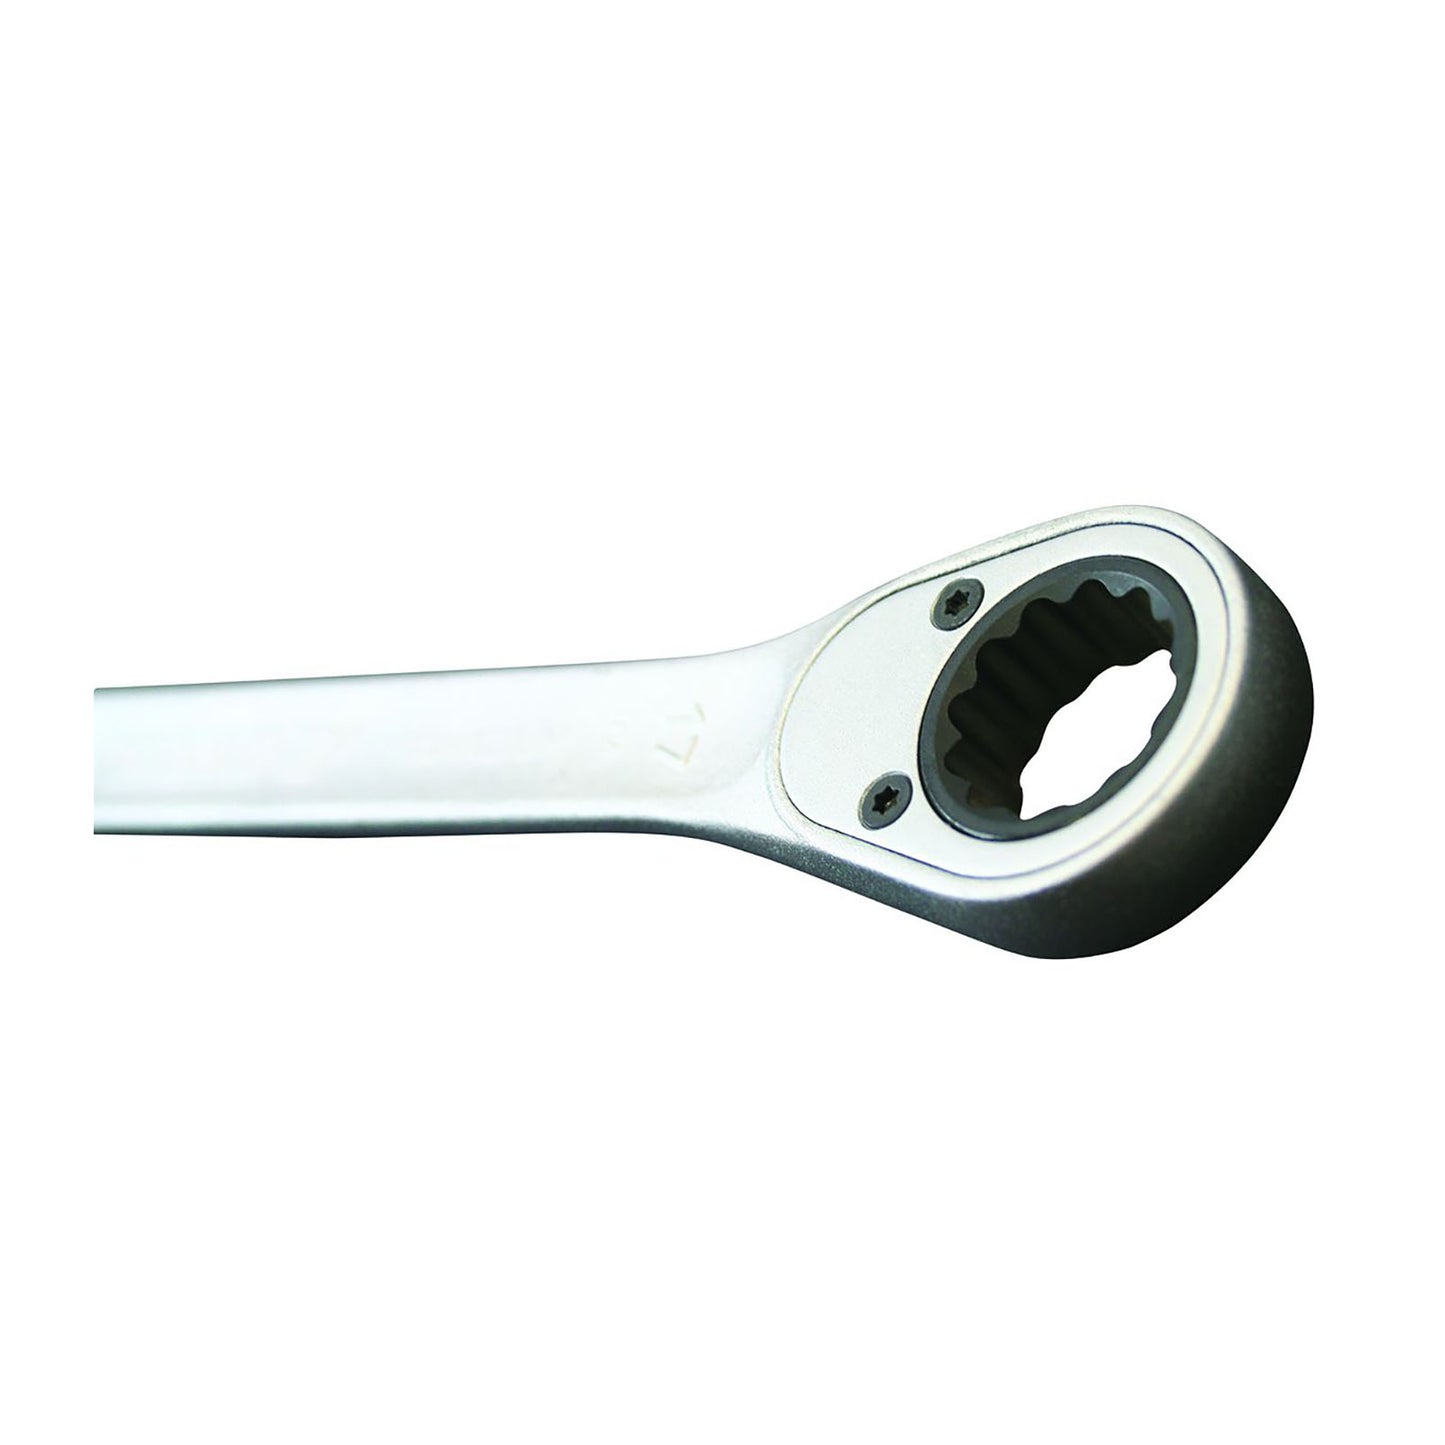 GEDORE 7 R 14 - Ratchet combination wrench, 14mm (2297124)